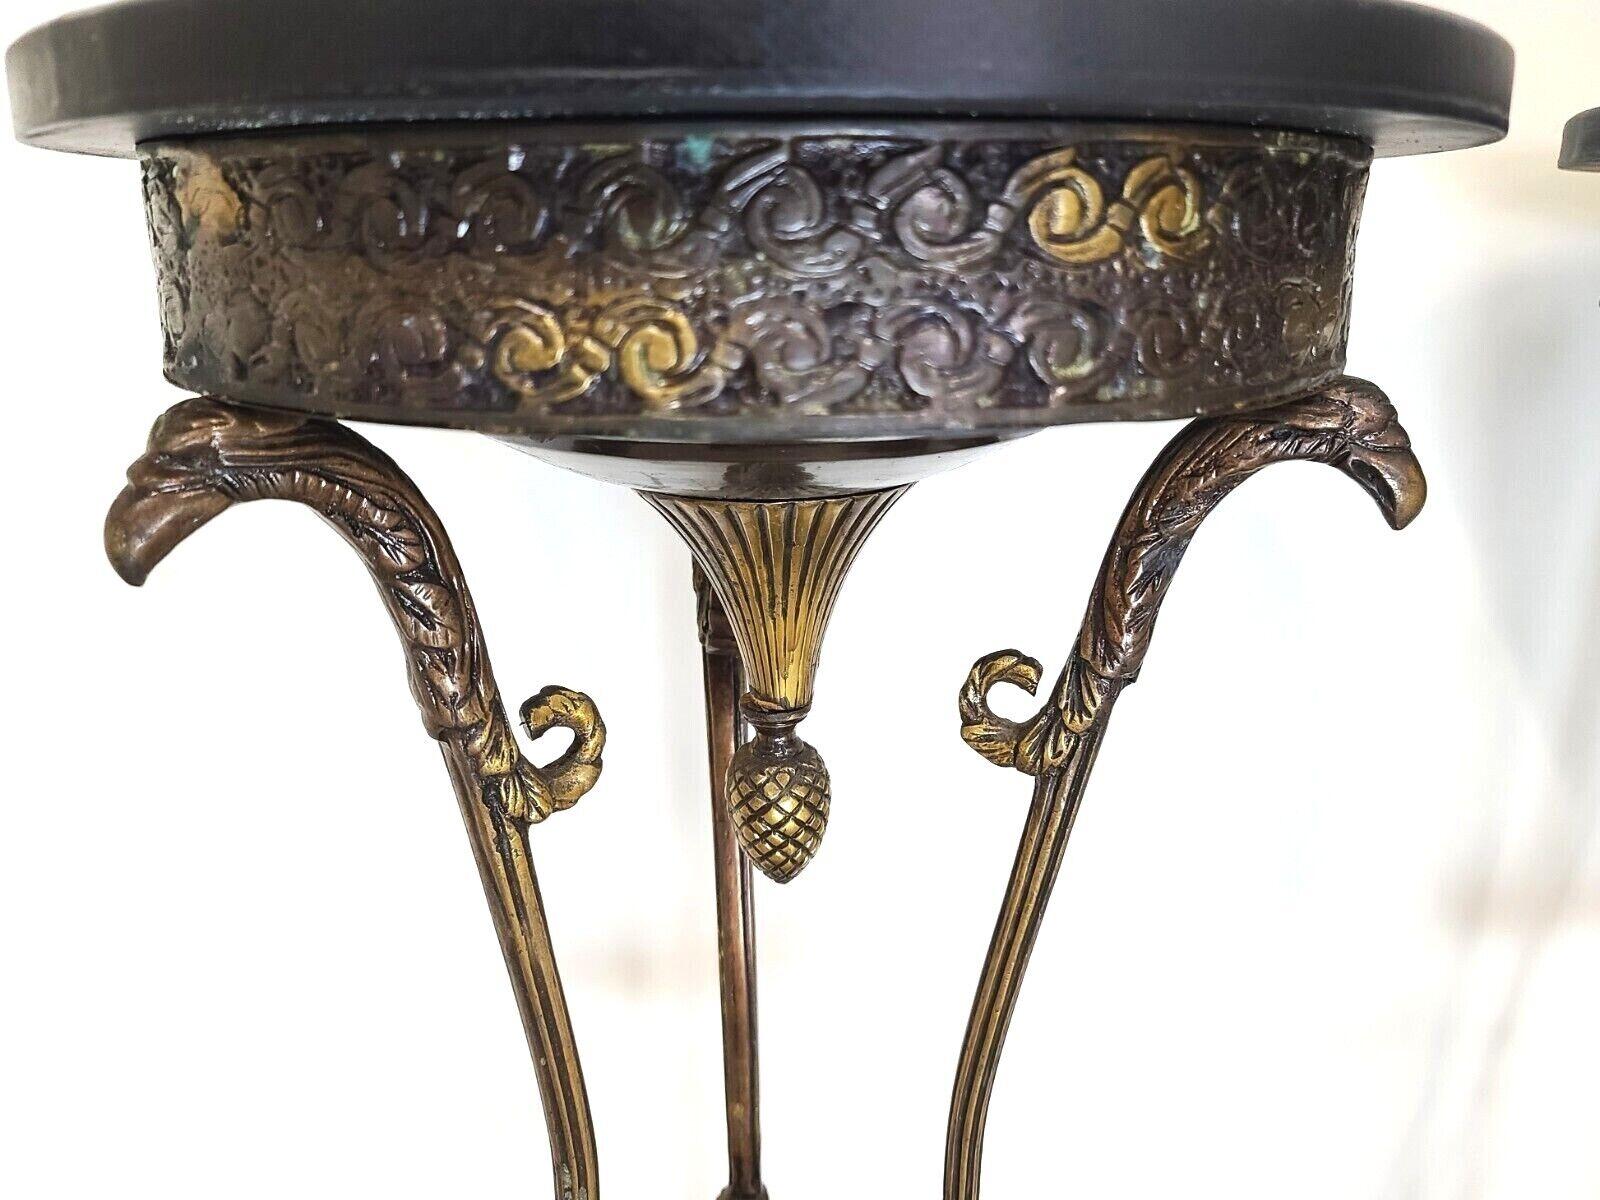 For FULL item description be sure to click on CONTINUE READING at the bottom of this listing.

Offering one of our recent palm beach estate fine furniture acquisitions of a
set of 2 antique grand entrance Italian solid brass griffins & marble